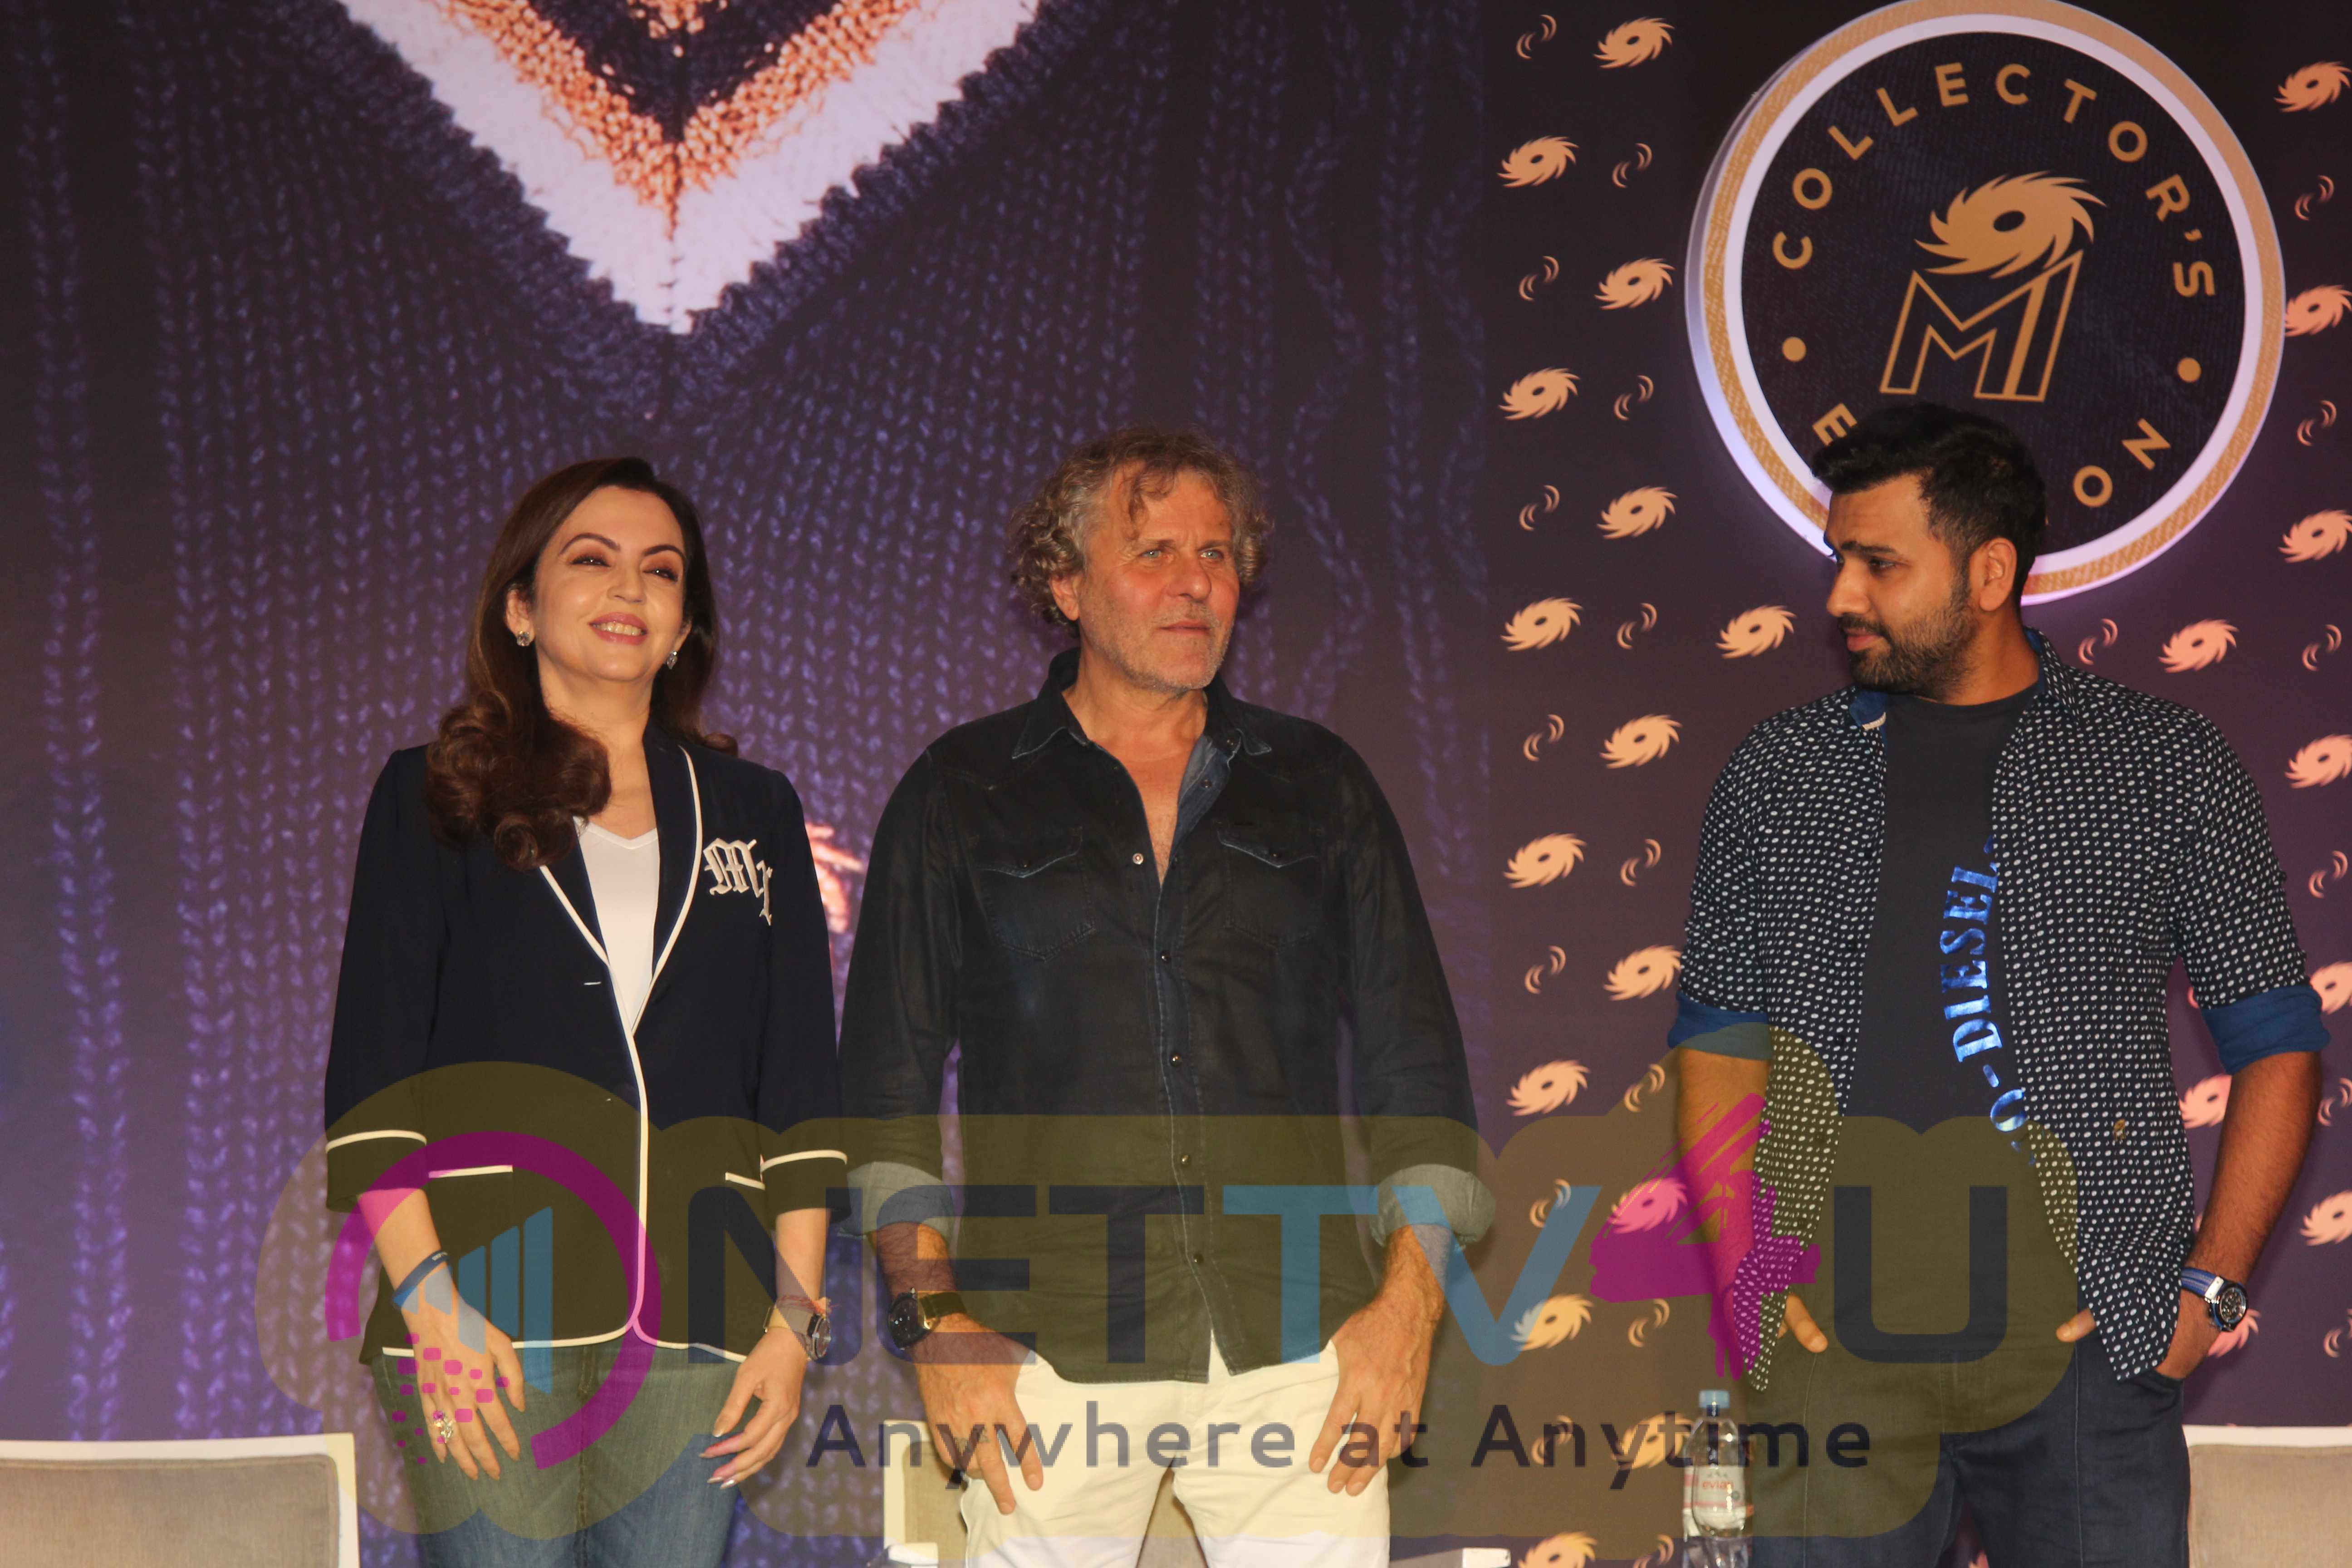  Mumbai Indians Collaborates With Fashion Brand Diesel Fine Photos Hindi Gallery